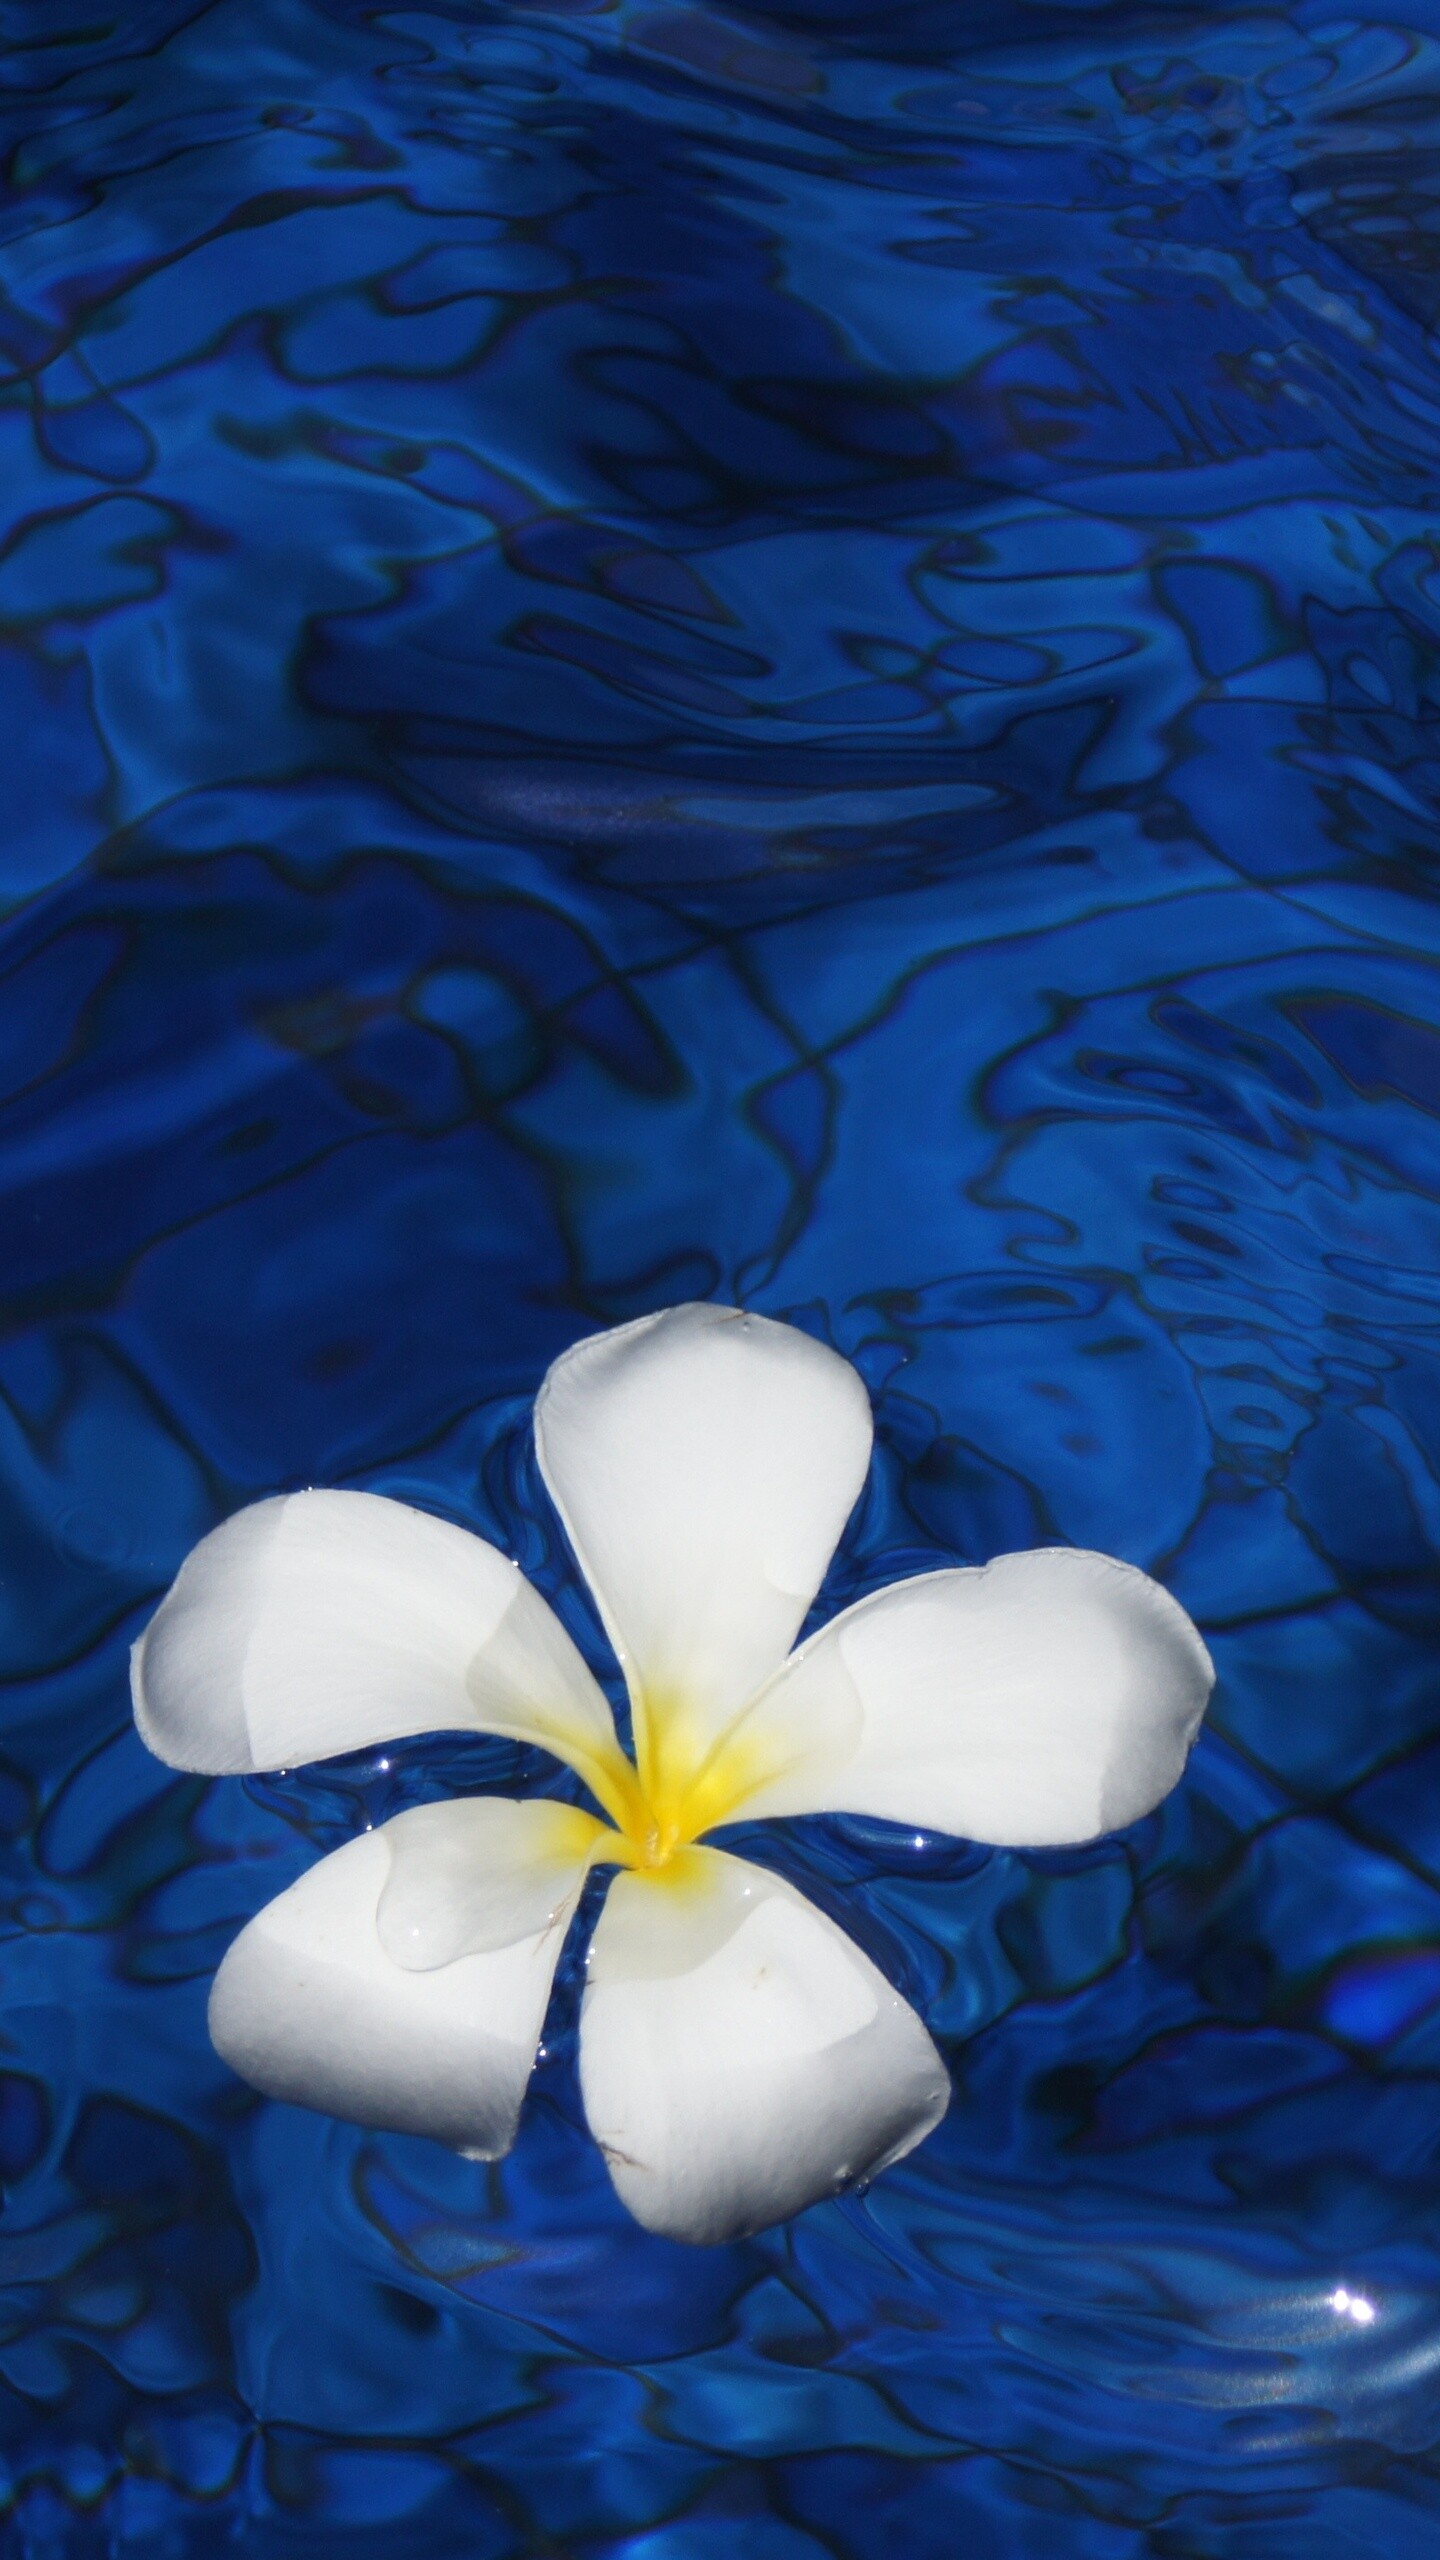 Frangipani Flower: A deciduous, ornamental tree to 6m with highly perfumed flowers, popular as a garden specimen or as a street tree. 1440x2560 HD Wallpaper.